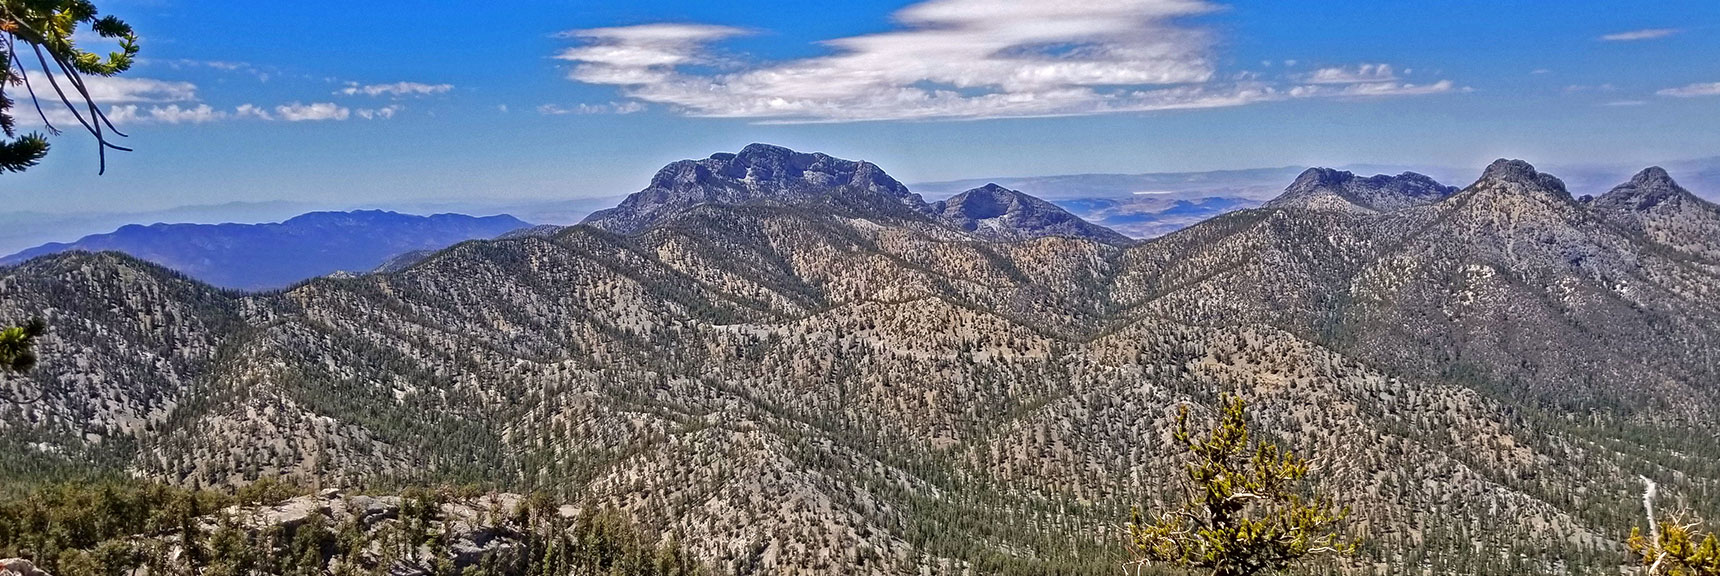 McFarland Peak (left), Mack's Peak, Sisters South and North from Descent Ridge Viewpoint | Lee to Kyle Canyon | Foxtail Approach | Mt Charleston Wilderness | Spring Mountains, Nevada